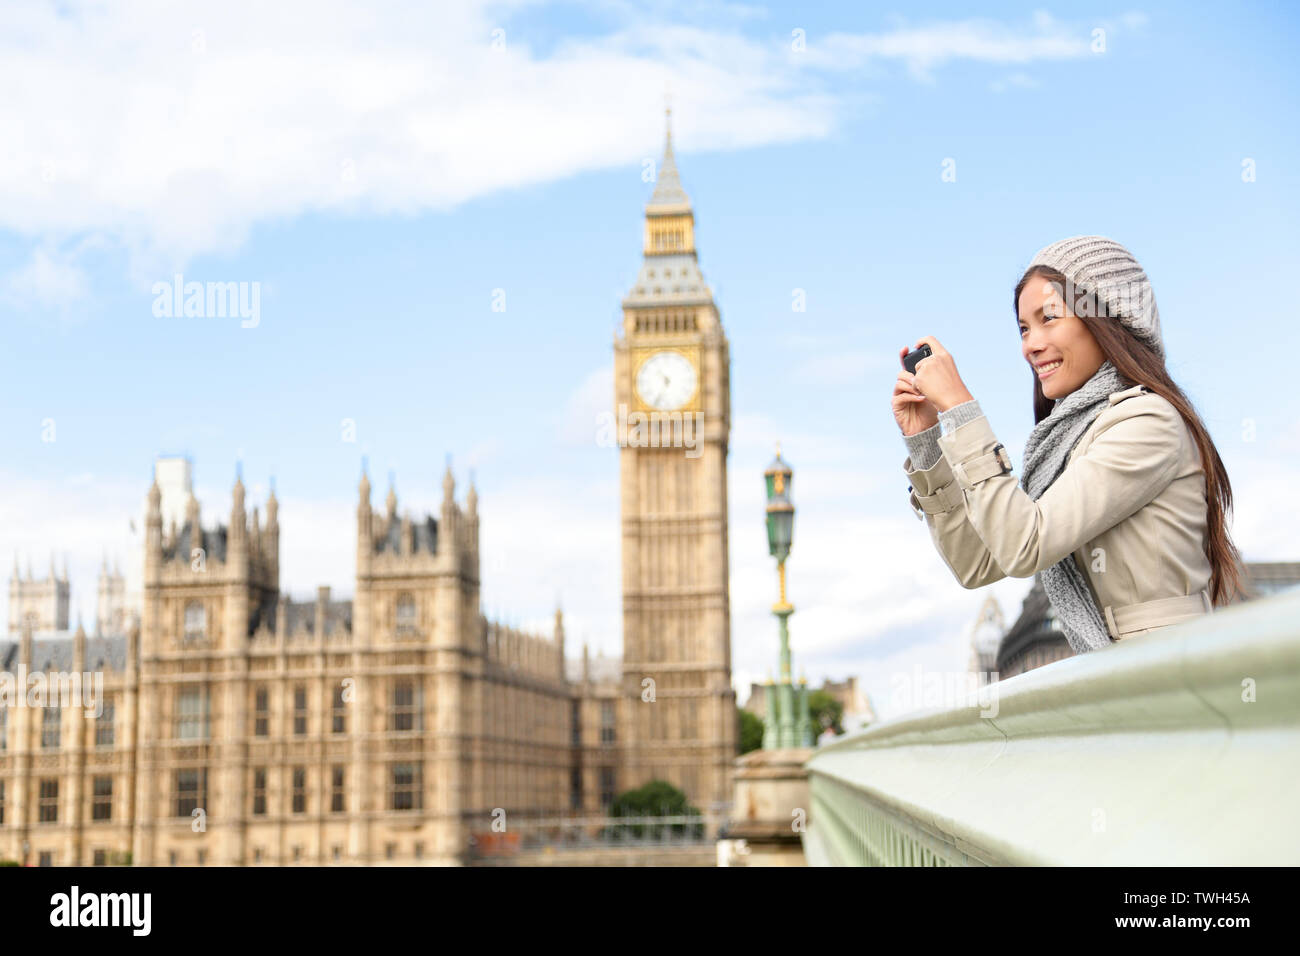 Travel tourist in london sightseeing taking photo pictures near Big Ben. Woman holding smart phone camera smiling happy near Palace of Westminster, Westminster Bridge, London, England Stock Photo